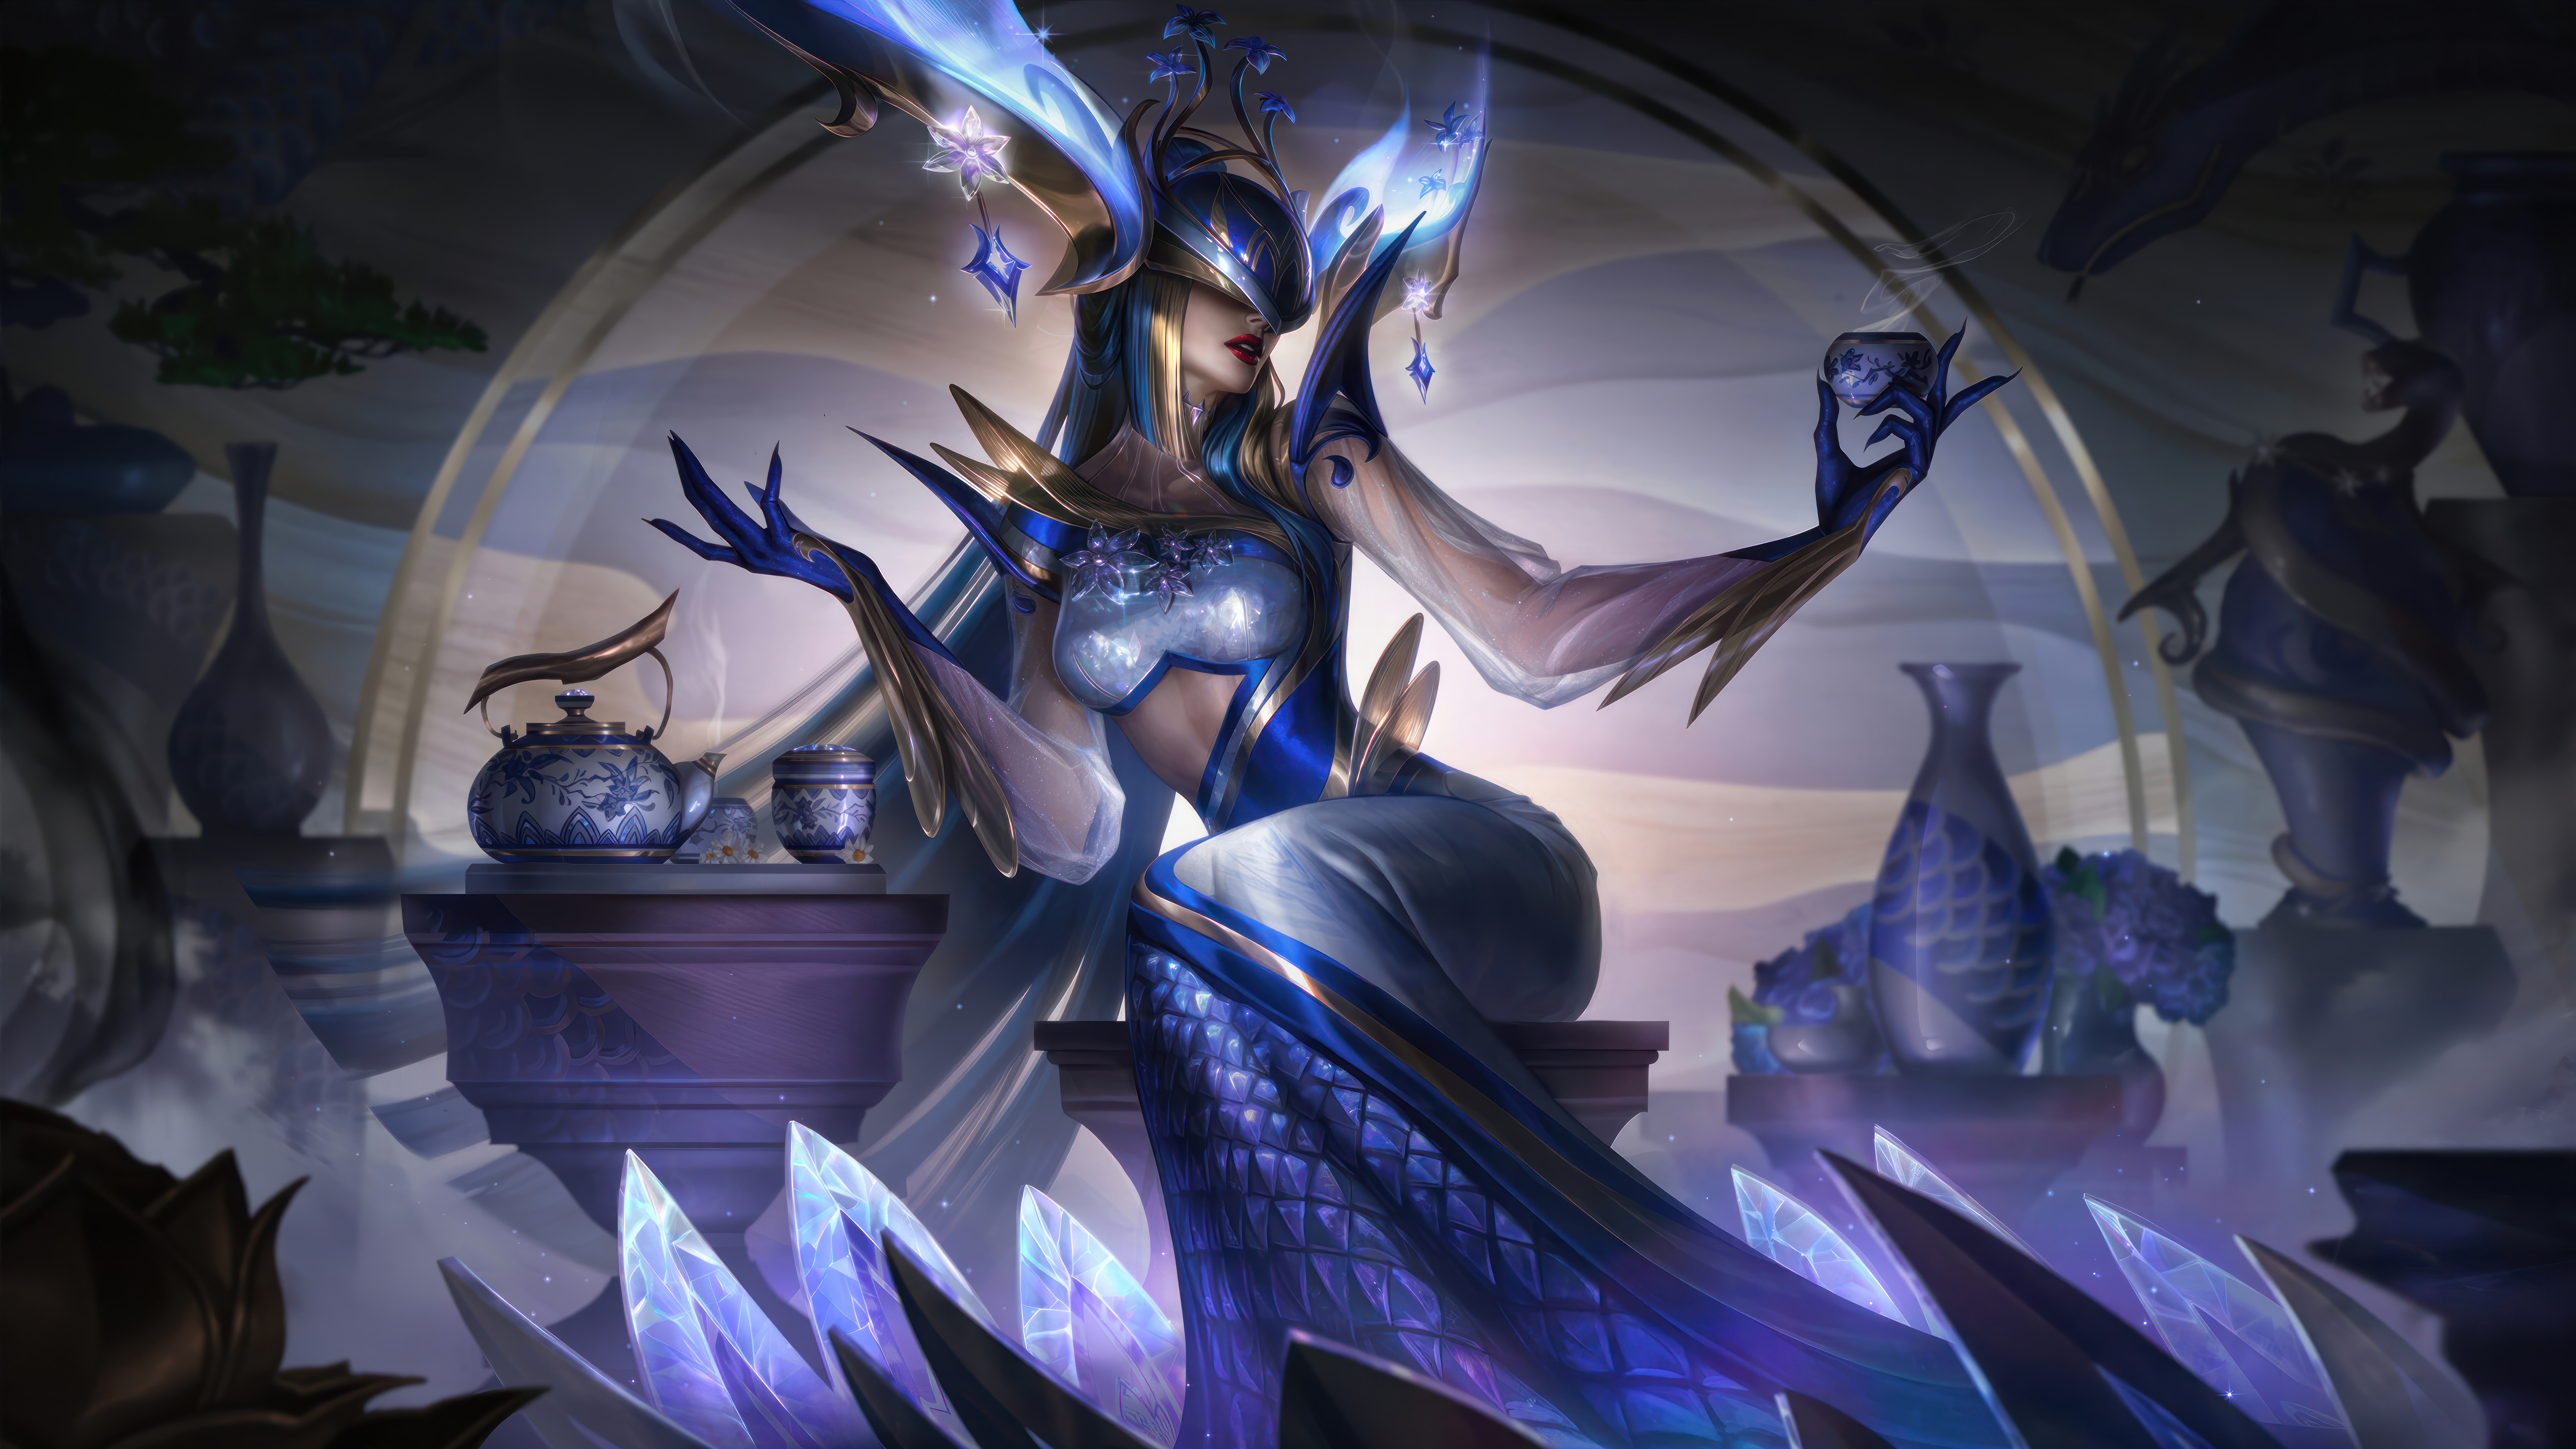 General 7680x4320 Porcelain porcelain (League of Legends) Lissandra (League of Legends) Prestige Edition (League of Legends) League of Legends digital art Riot Games GZG 4K video games video game art video game characters two tone hair